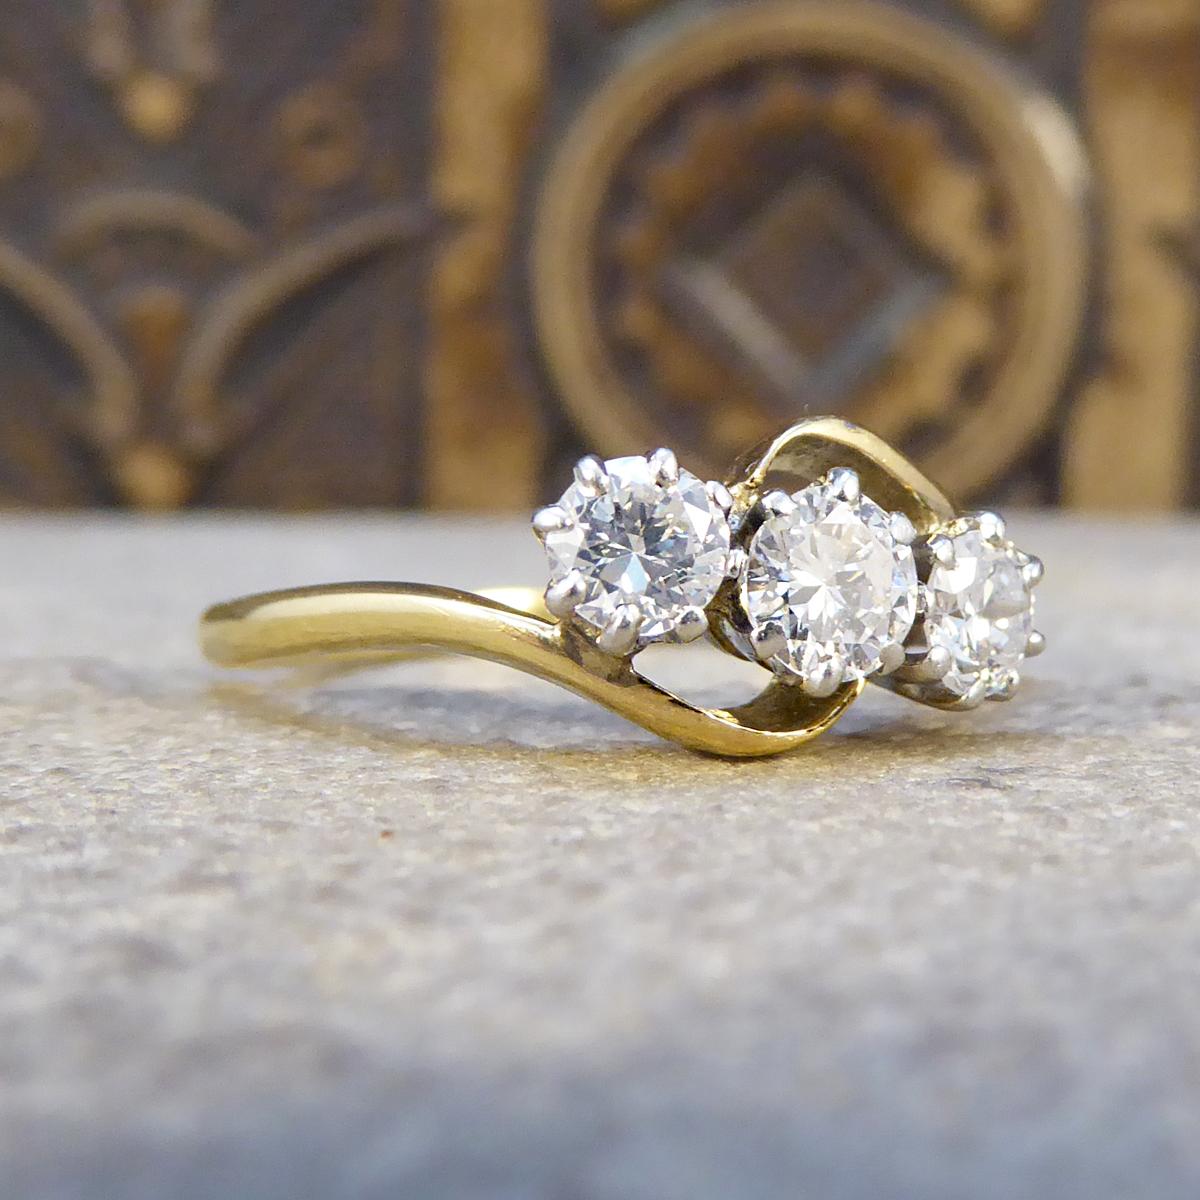 A very elegant three stone diamond ring that is set with three sparkling diamonds. The band is 18ct Yellow Gold with a 18ct White Gold setting on the top. A very pretty antique ring hand crafted in the Edwardian era.

Diamond Details:
Cut: Round